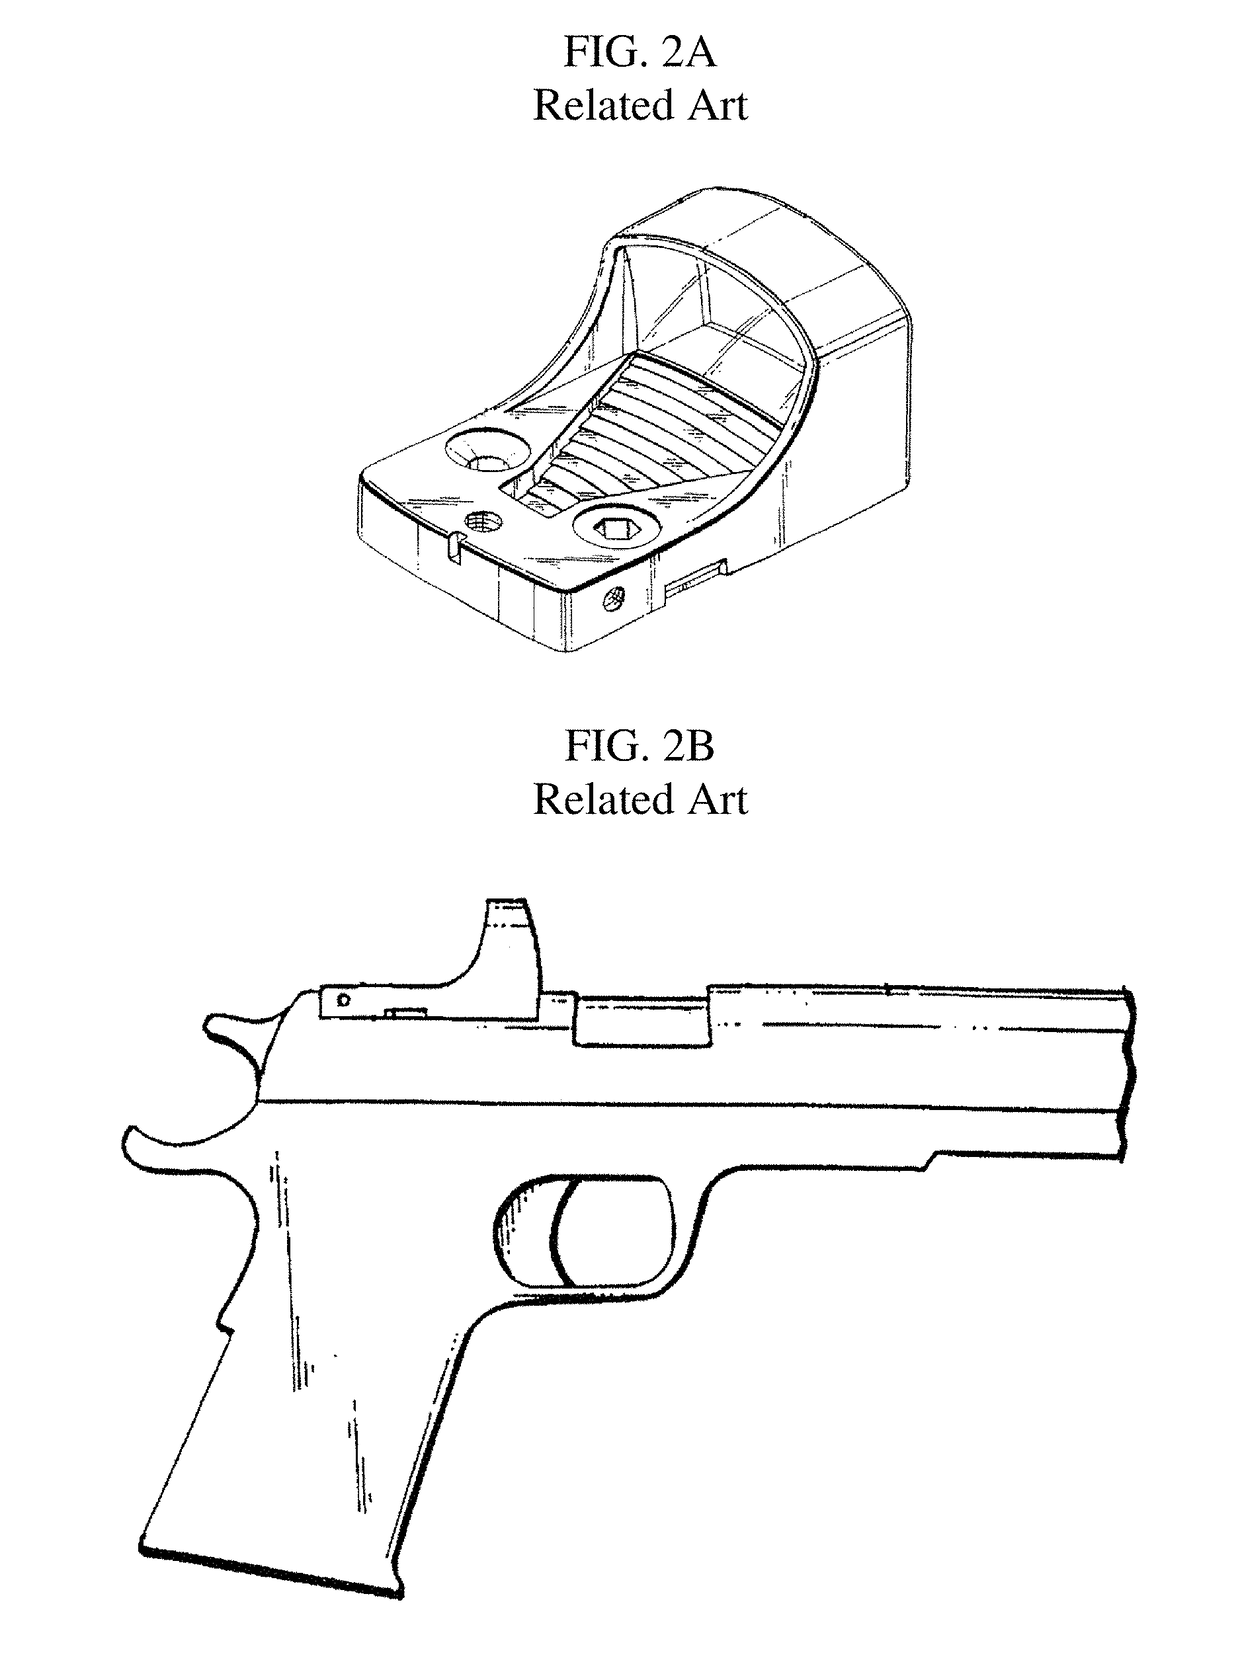 Collapsible reflective sight for a firearm